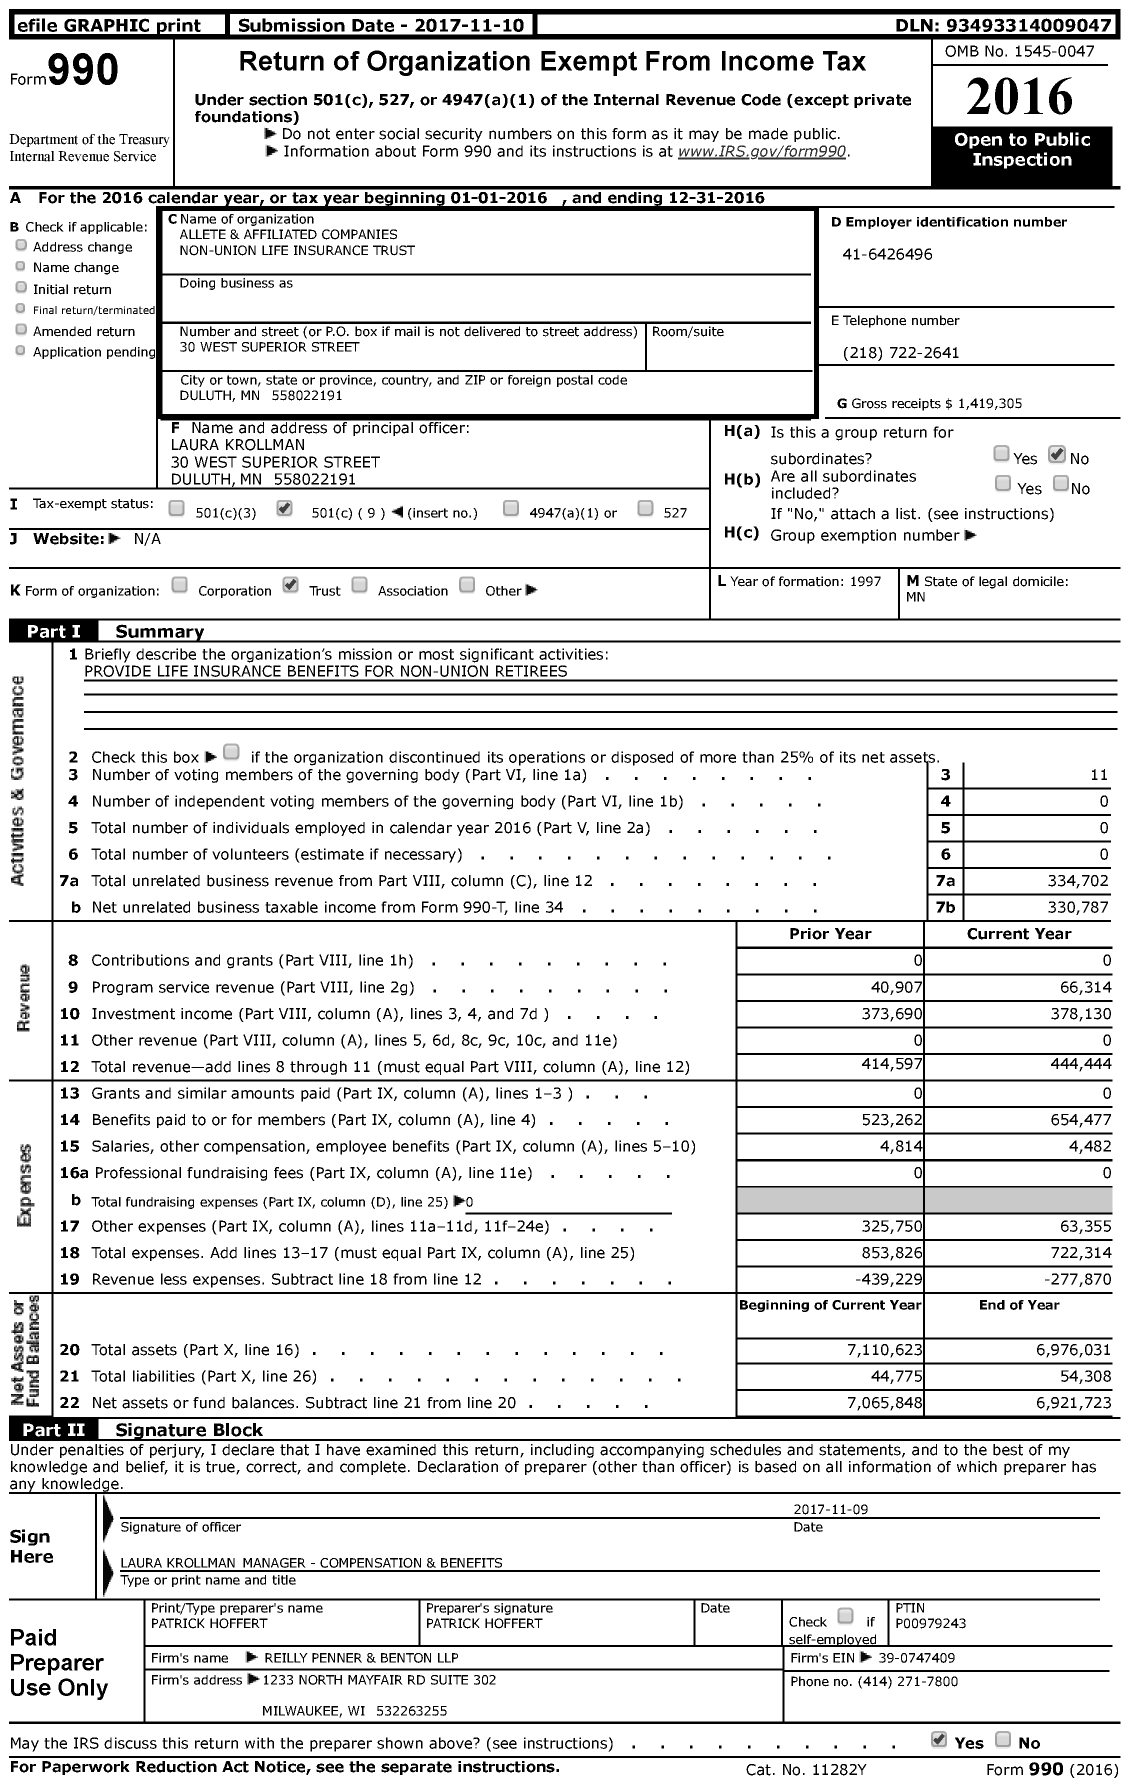 Image of first page of 2016 Form 990 for Allete and Affiliated Companies Non-Union Life Insurance Trust